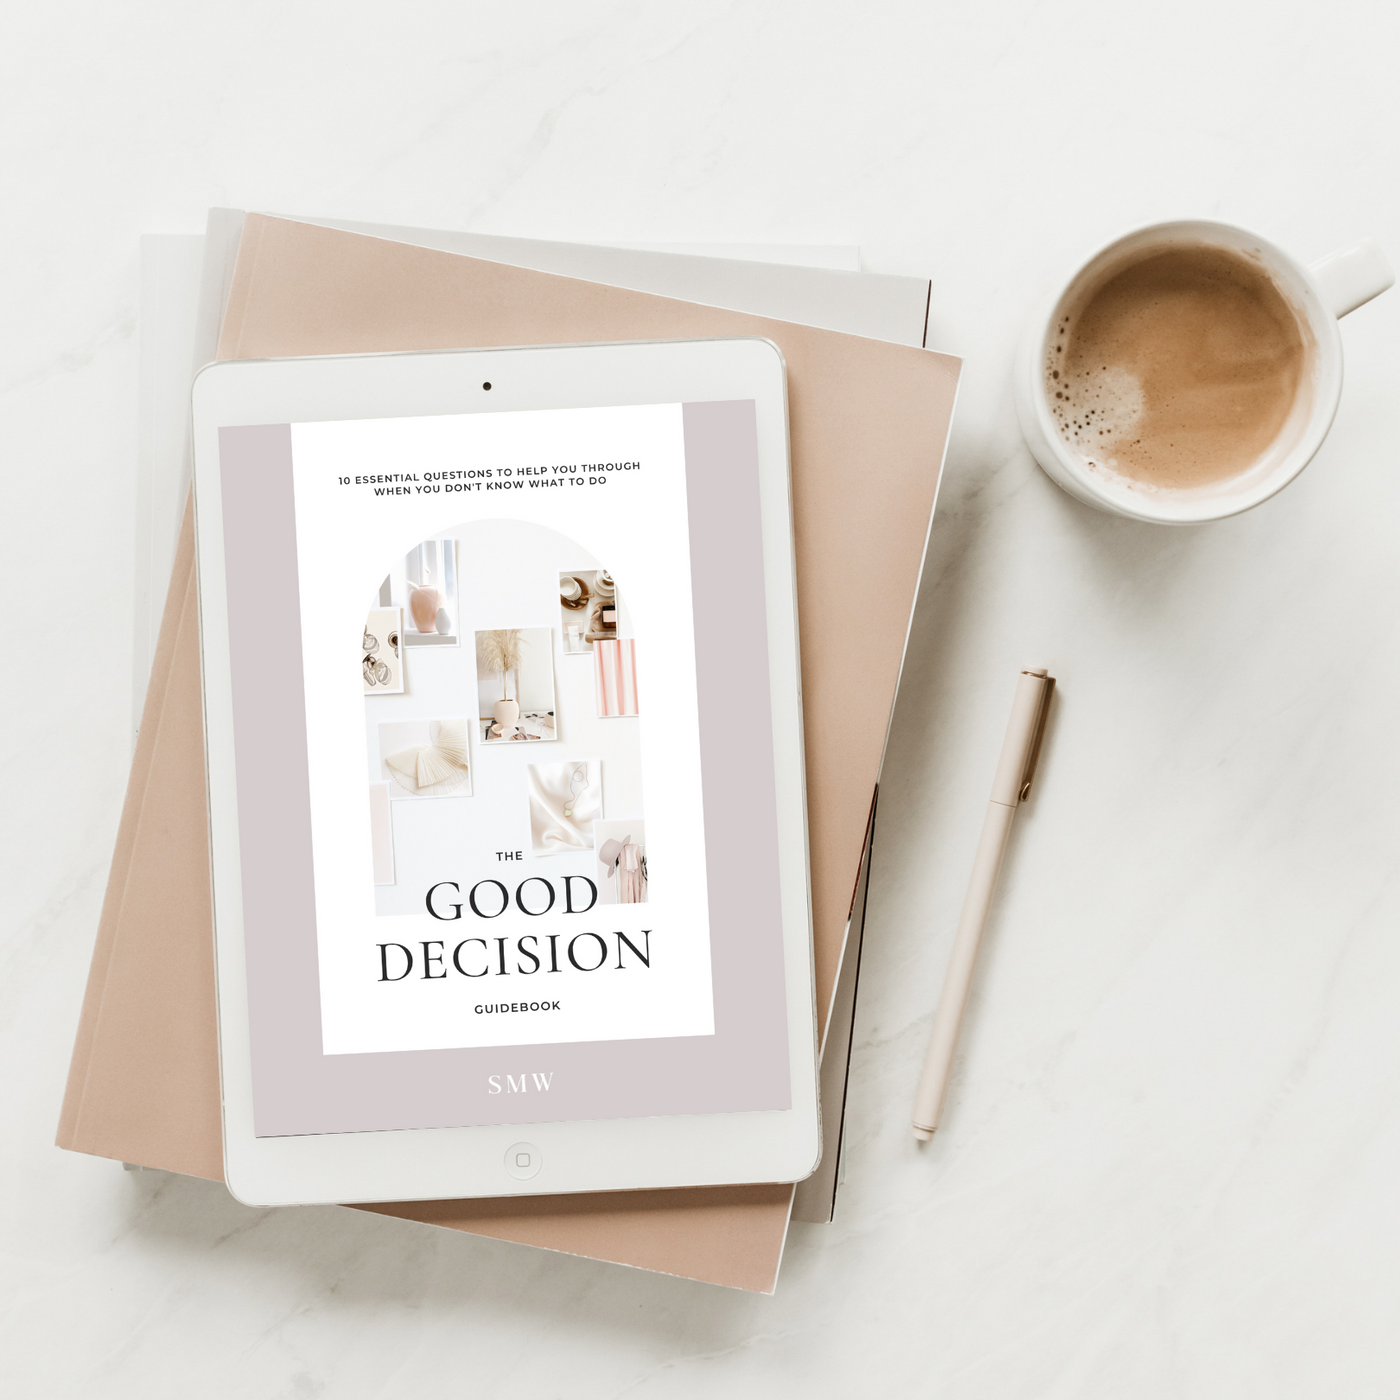 The Good Decision Guidebook